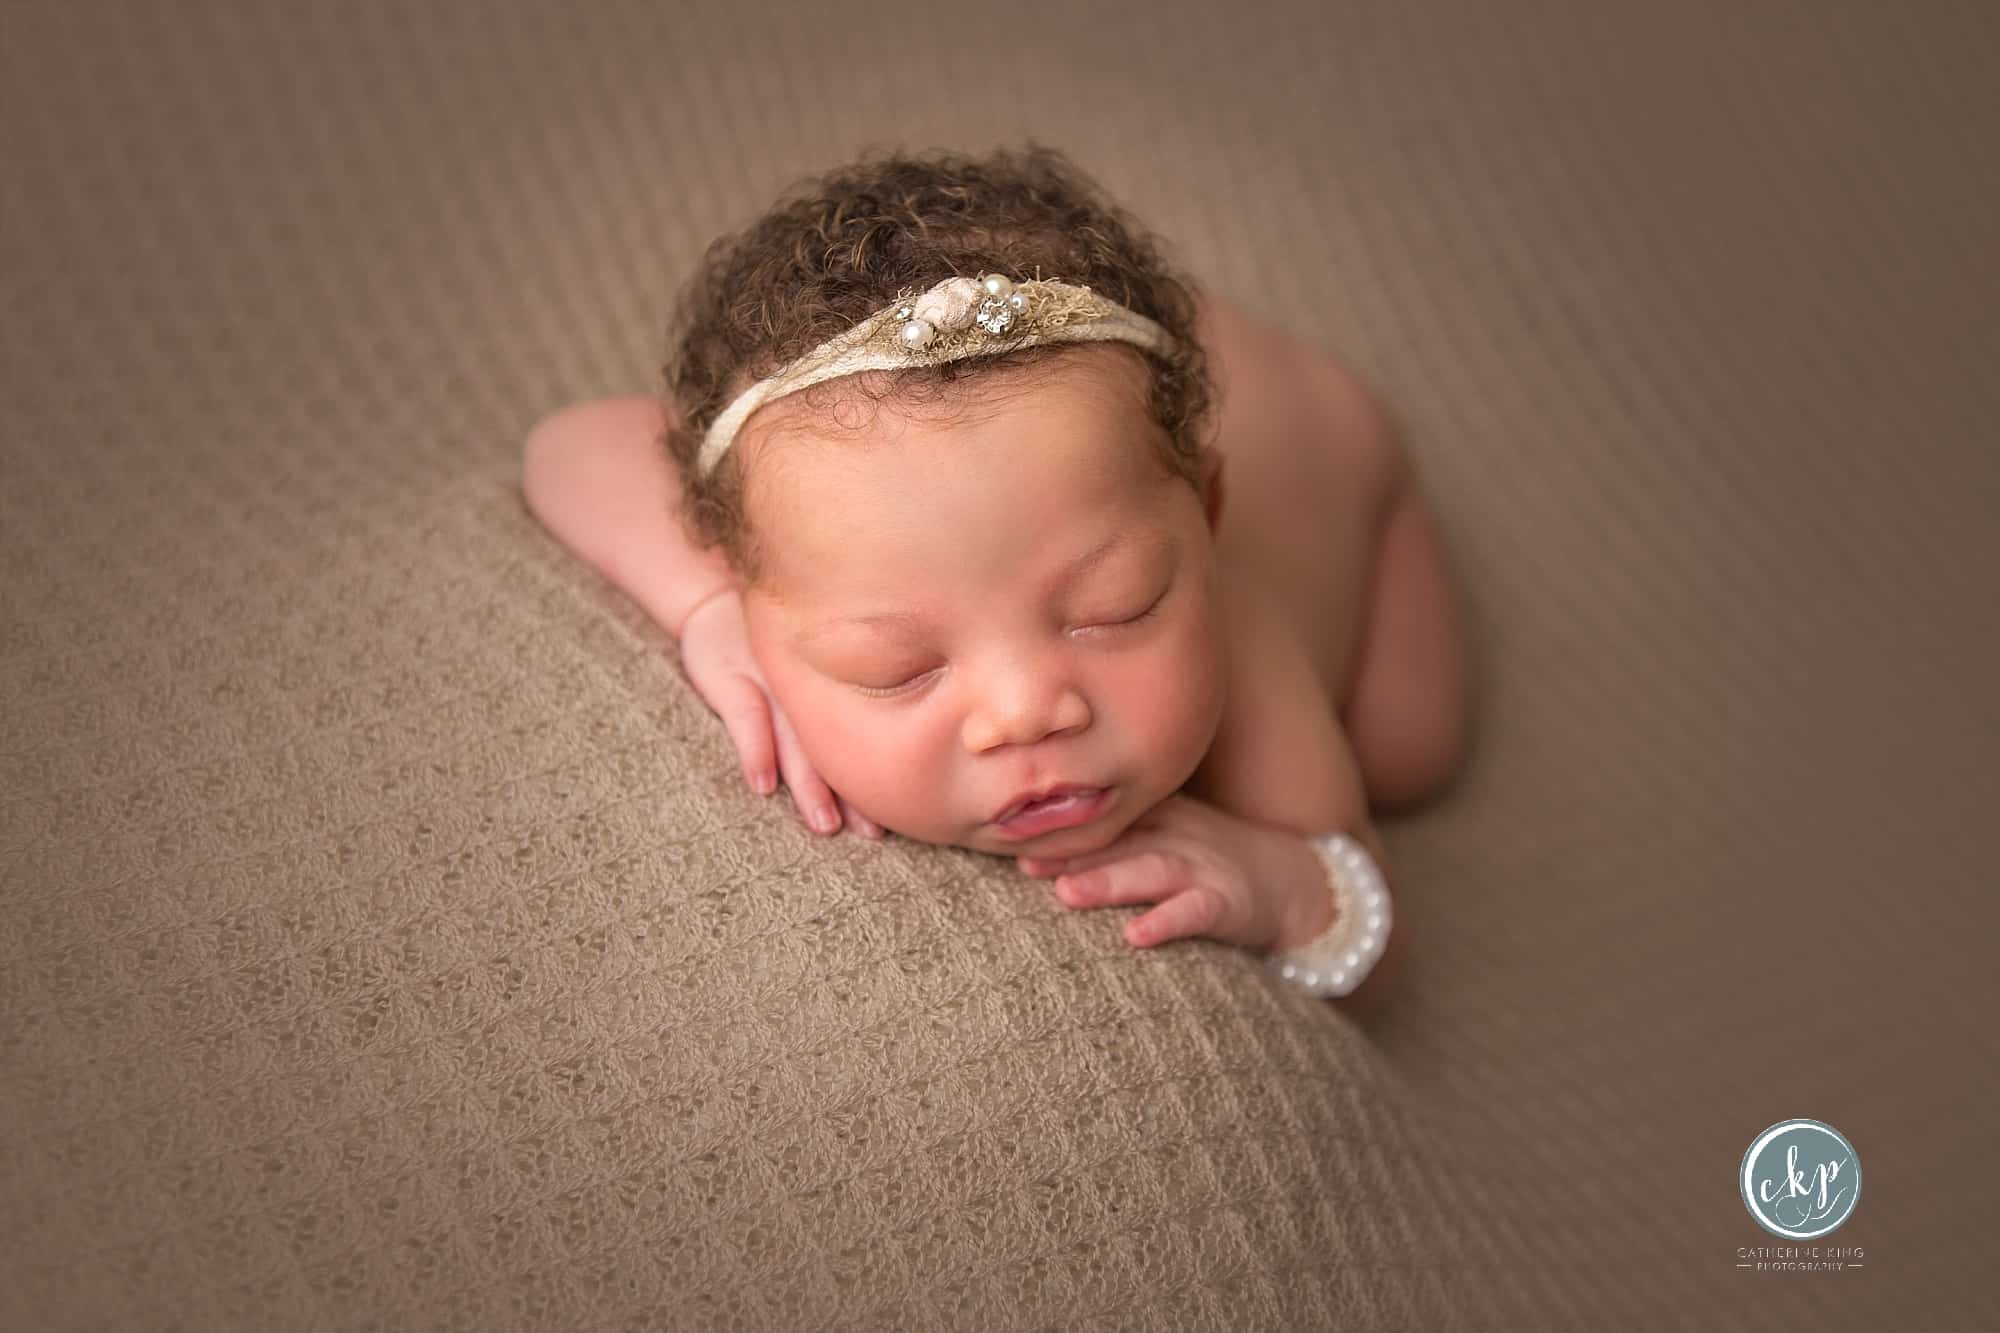 Breighlyn, 7 day old baby in madison ct studio photographed by catherine king photography a ct newborn phtoographer